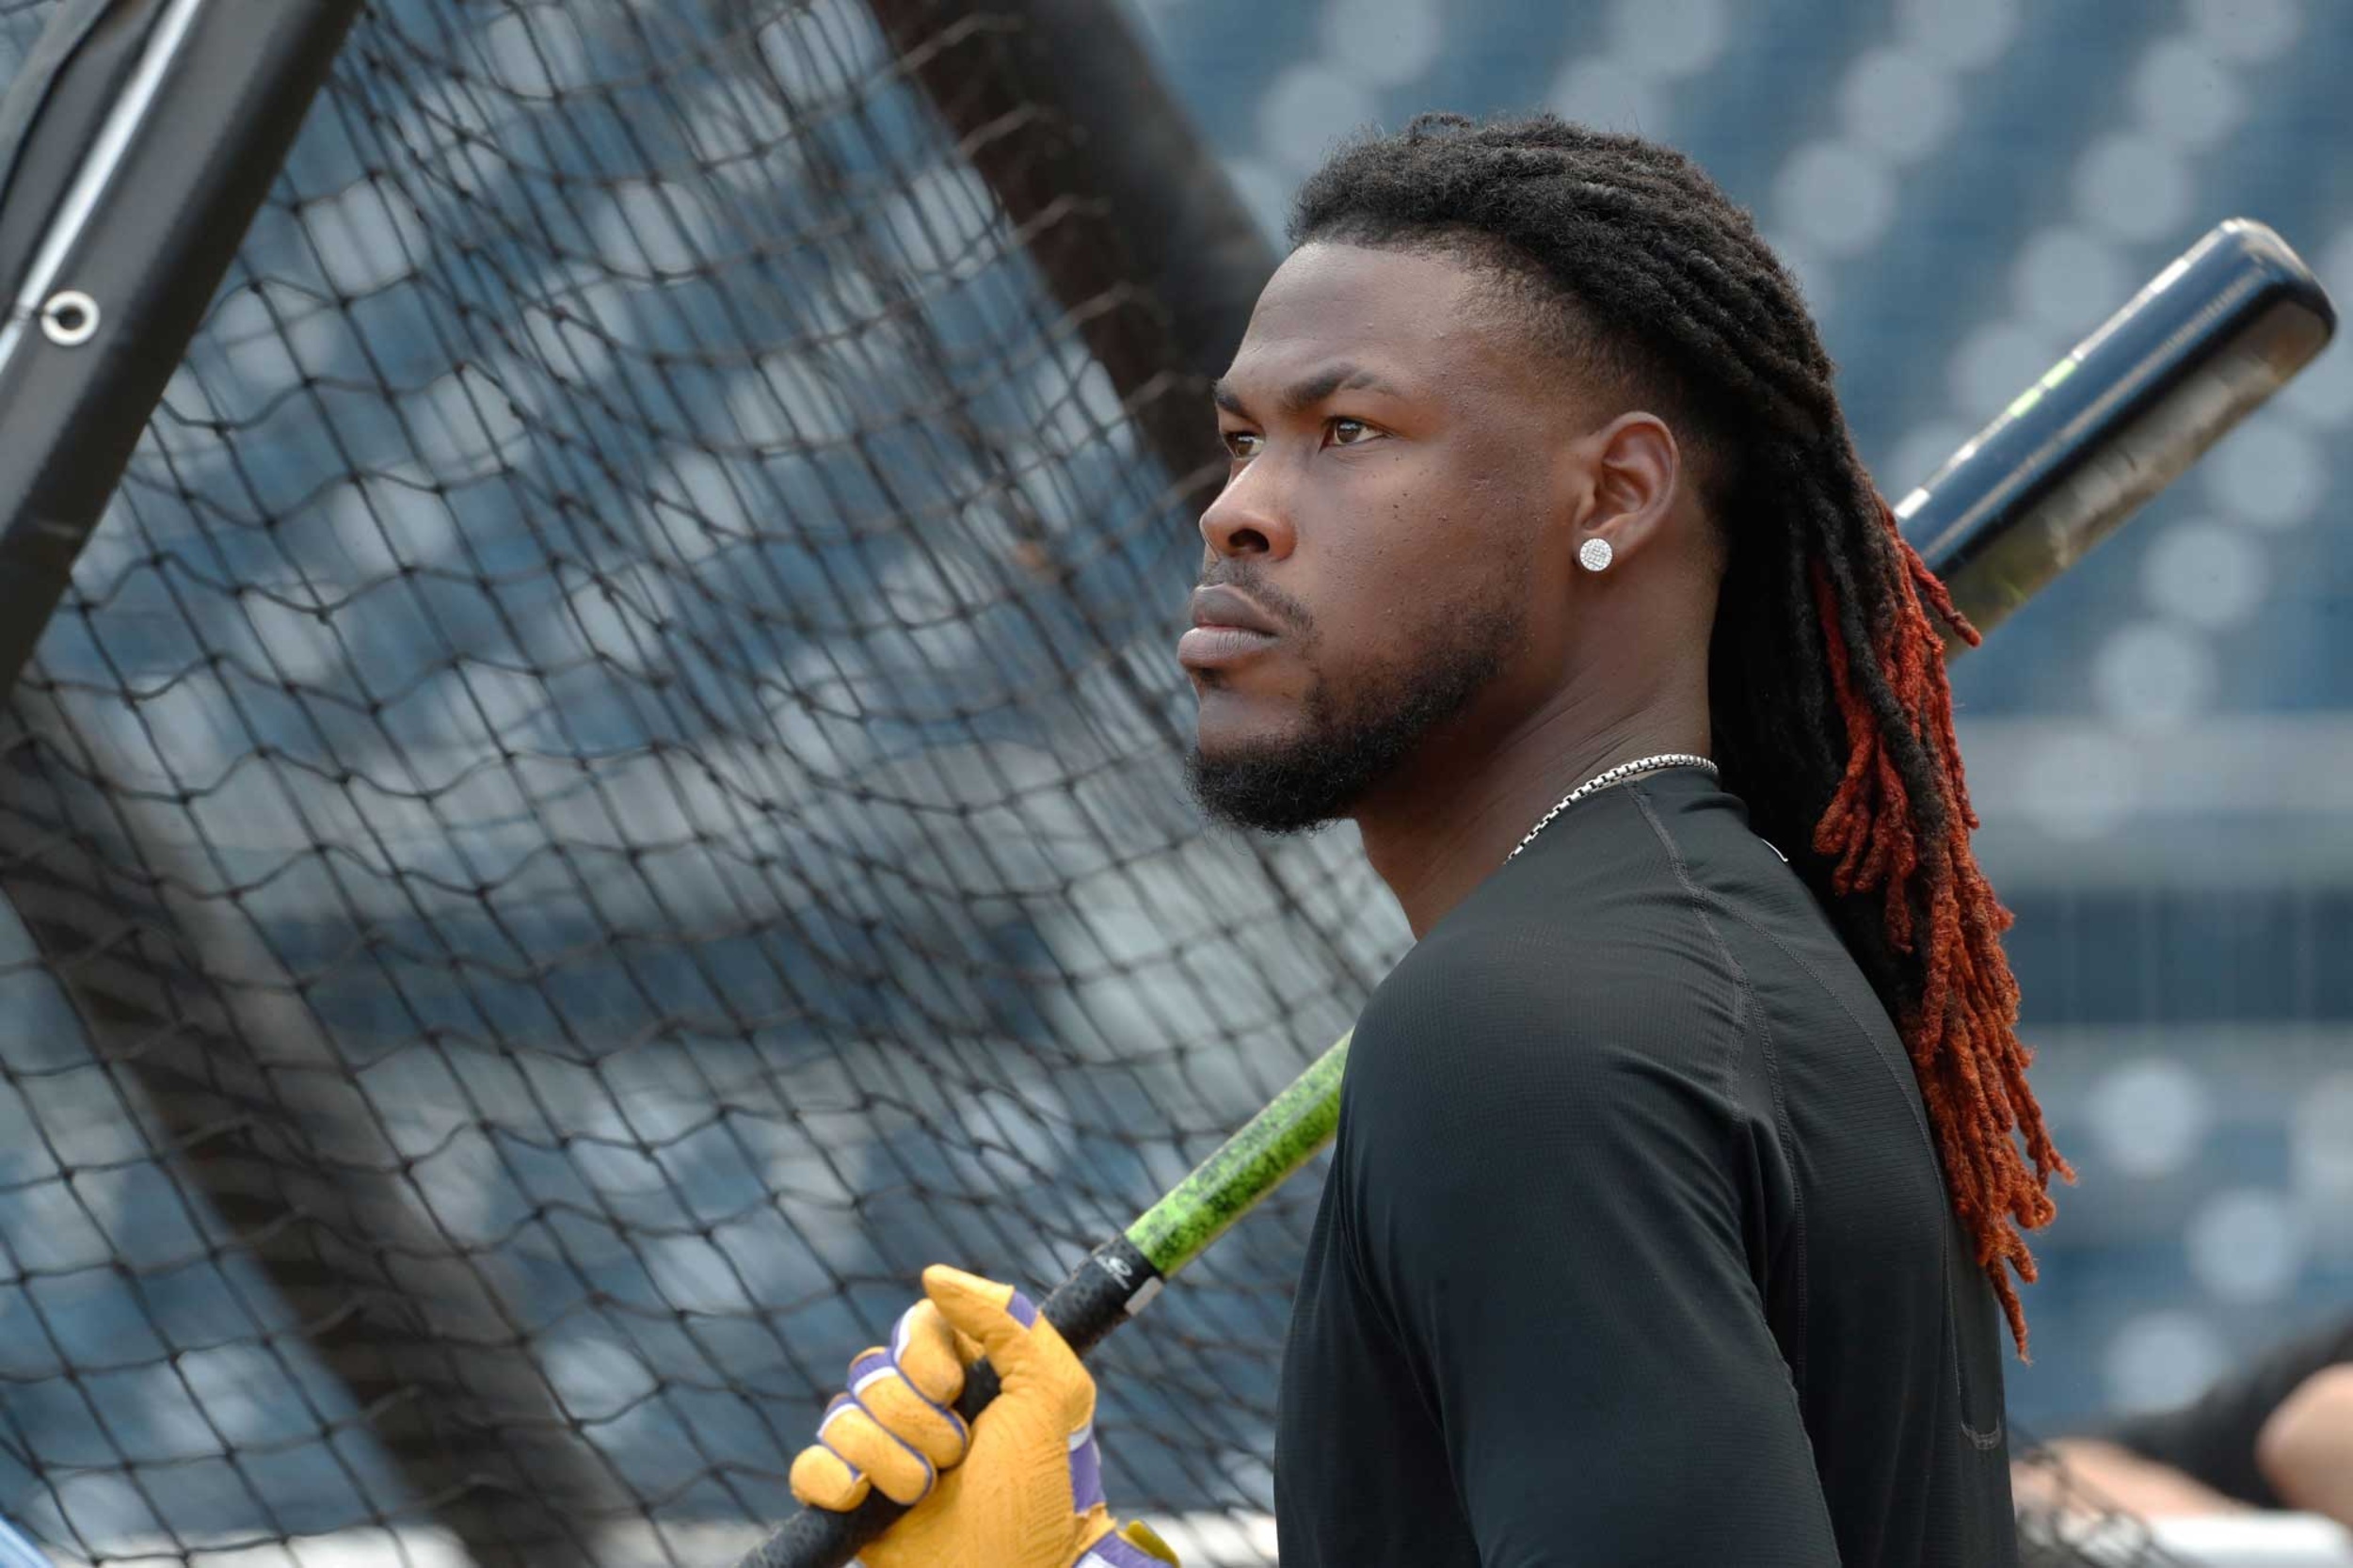 <p>The highly talented Cruz played only nine games last season, suffering a catastrophic leg injury early in the year. The Pirates hope to take a step forward this season, and a healthy Cruz will be a big part after he showed his talent in 2022 with 17 home runs in 87 games.</p><p><a href='https://www.msn.com/en-us/community/channel/vid-cj9pqbr0vn9in2b6ddcd8sfgpfq6x6utp44fssrv6mc2gtybw0us'>Follow us on MSN to see more of our exclusive MLB content.</a></p>